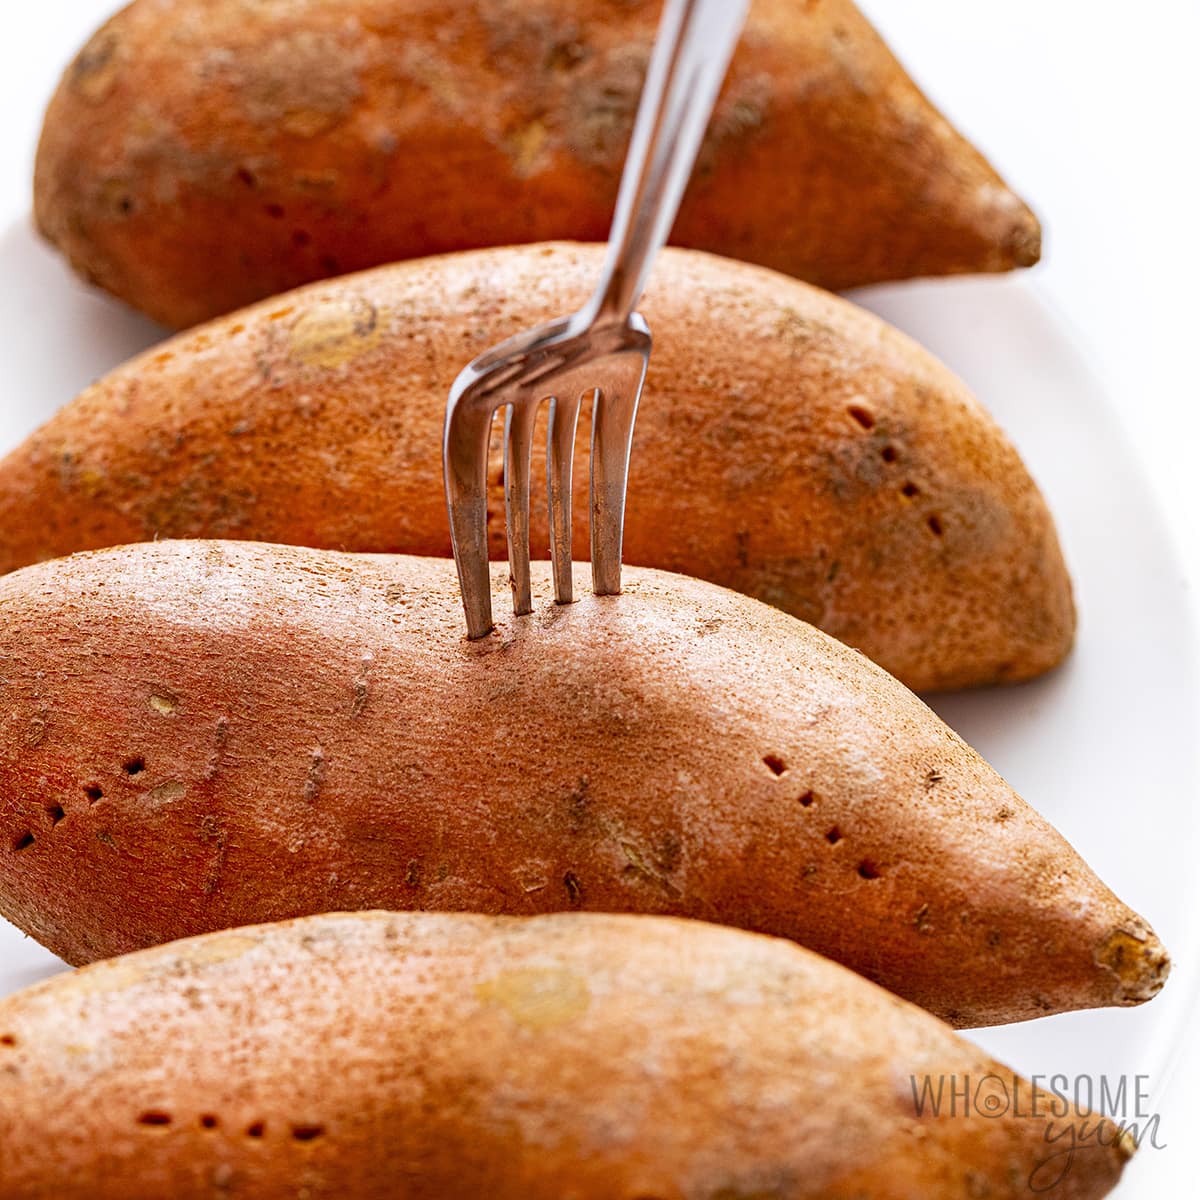 Poke holes in the sweet potatoes with a fork.